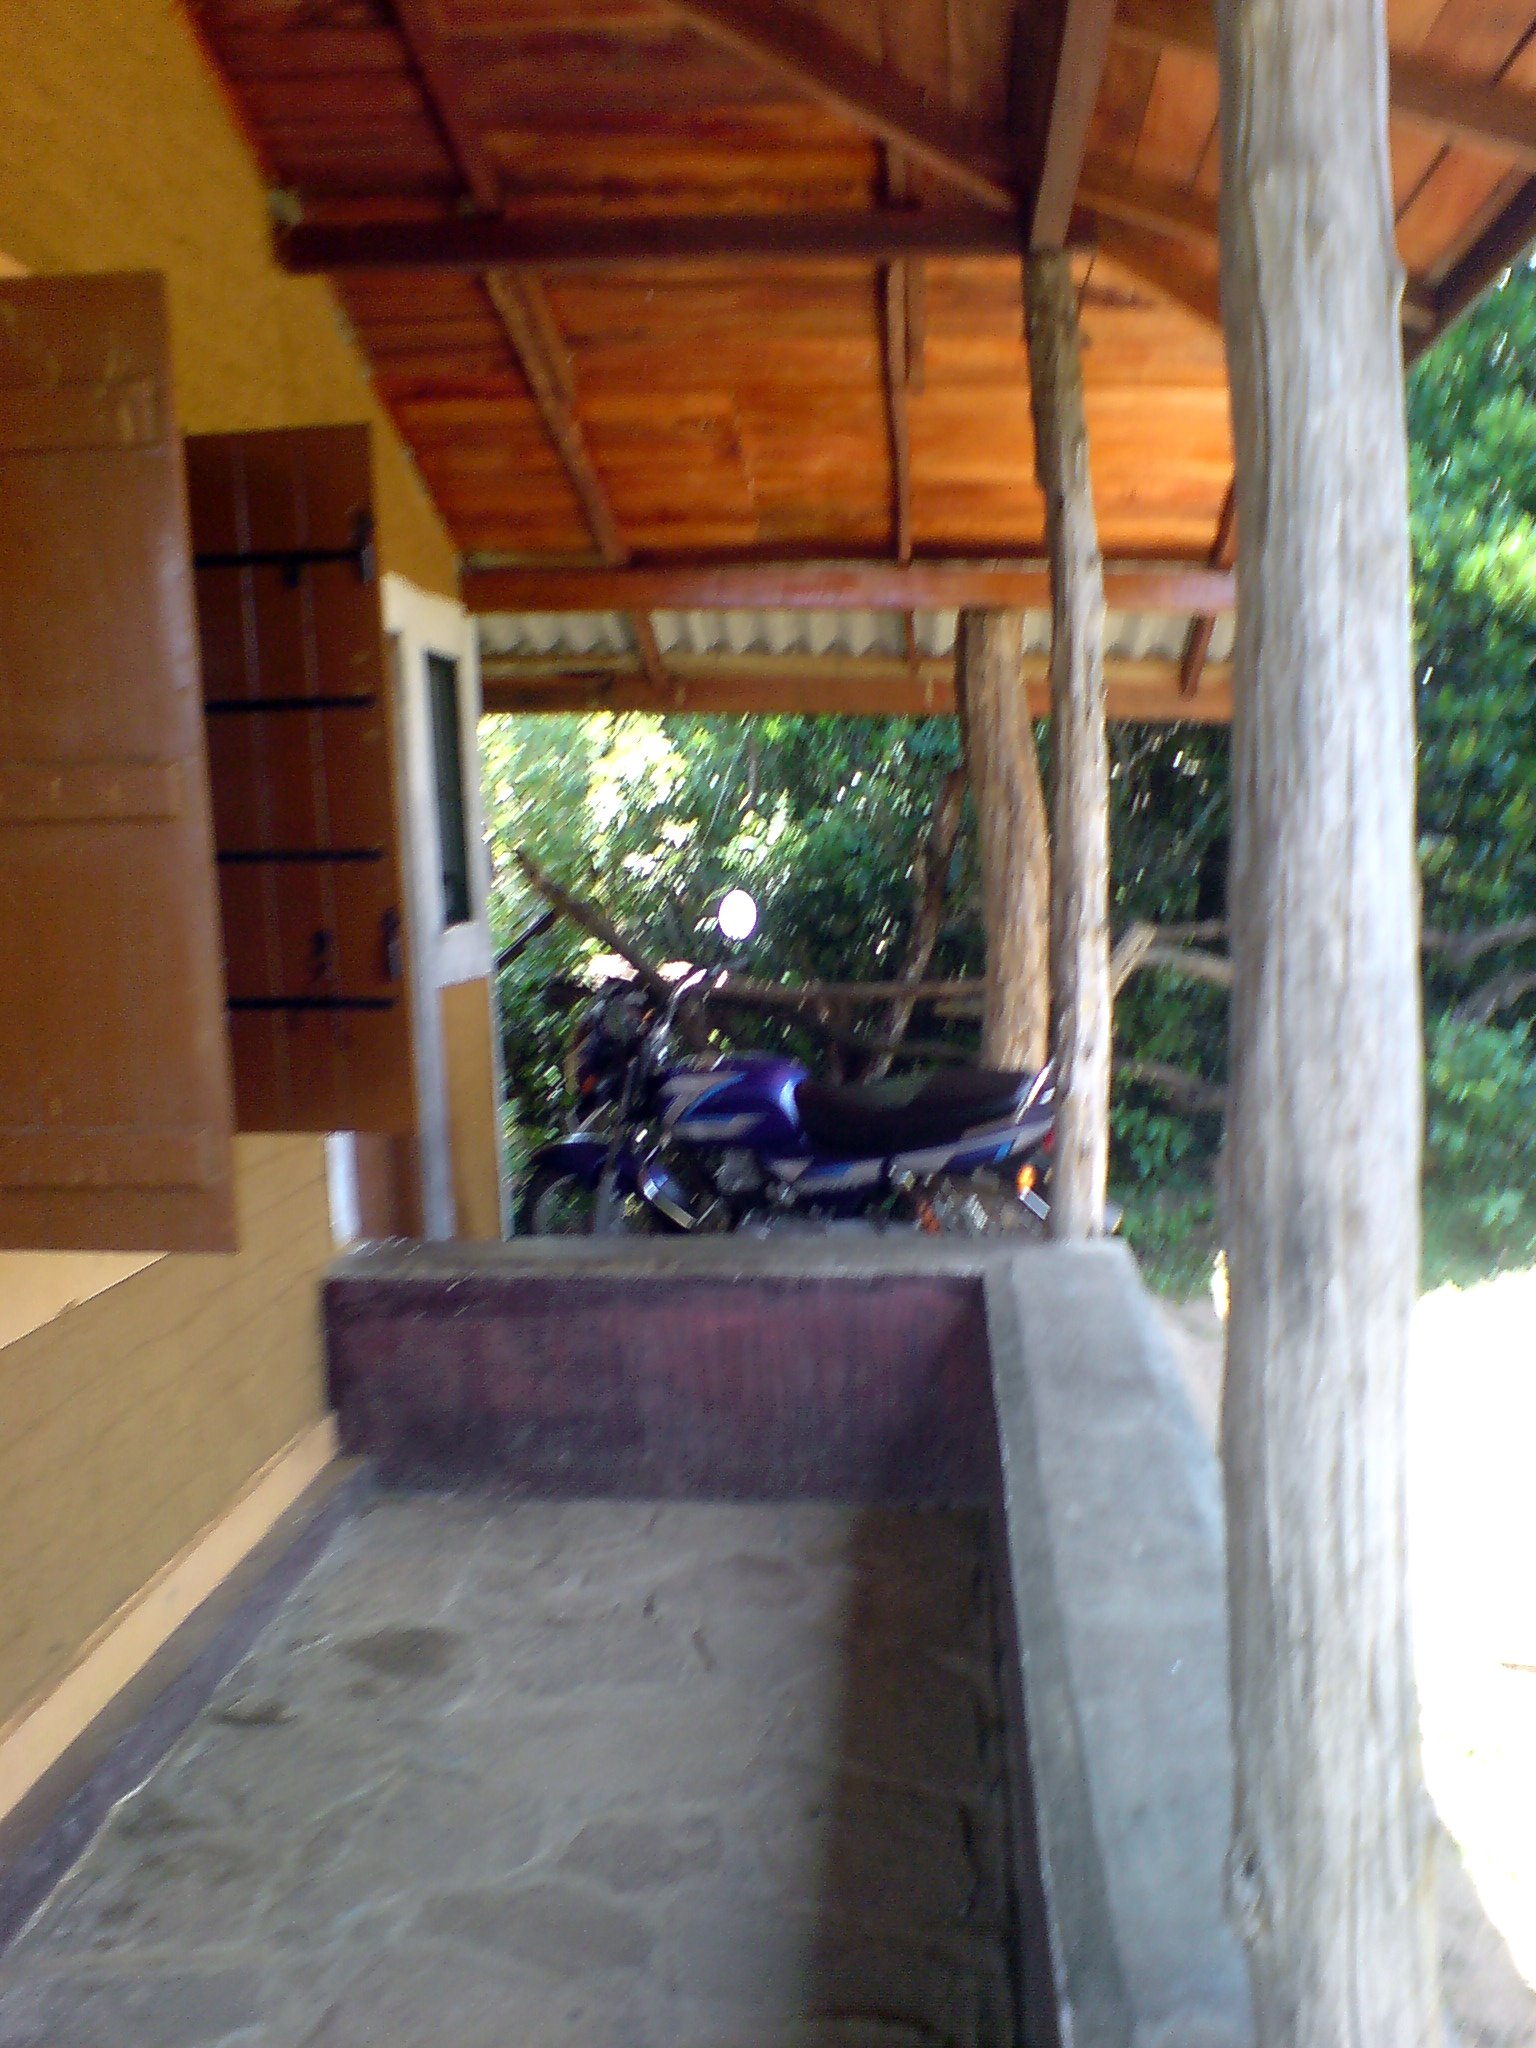 an image of there motorbikes parked outside of the building